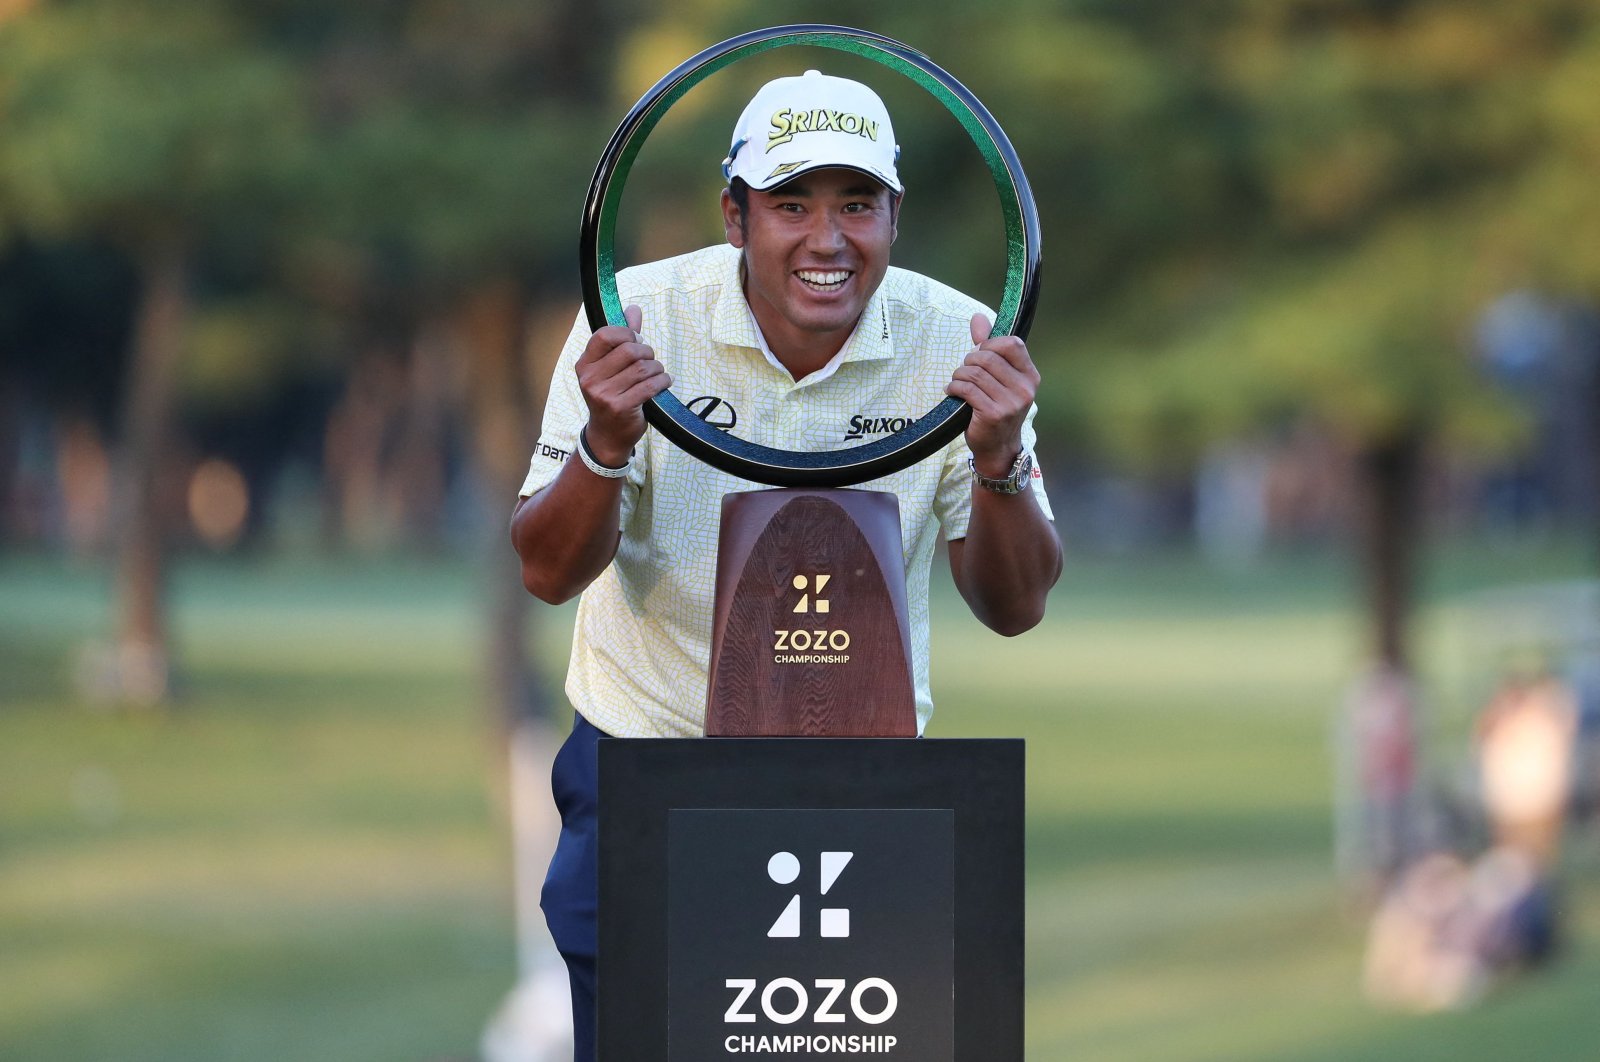 Japan's Hideki Matsuyama poses with the trophy after winning the PGA ZOZO Championship golf tournament at the Narashino Country Club in Inzai, Chiba prefecture, Japan, Oct. 24, 2021. (AFP Photo)